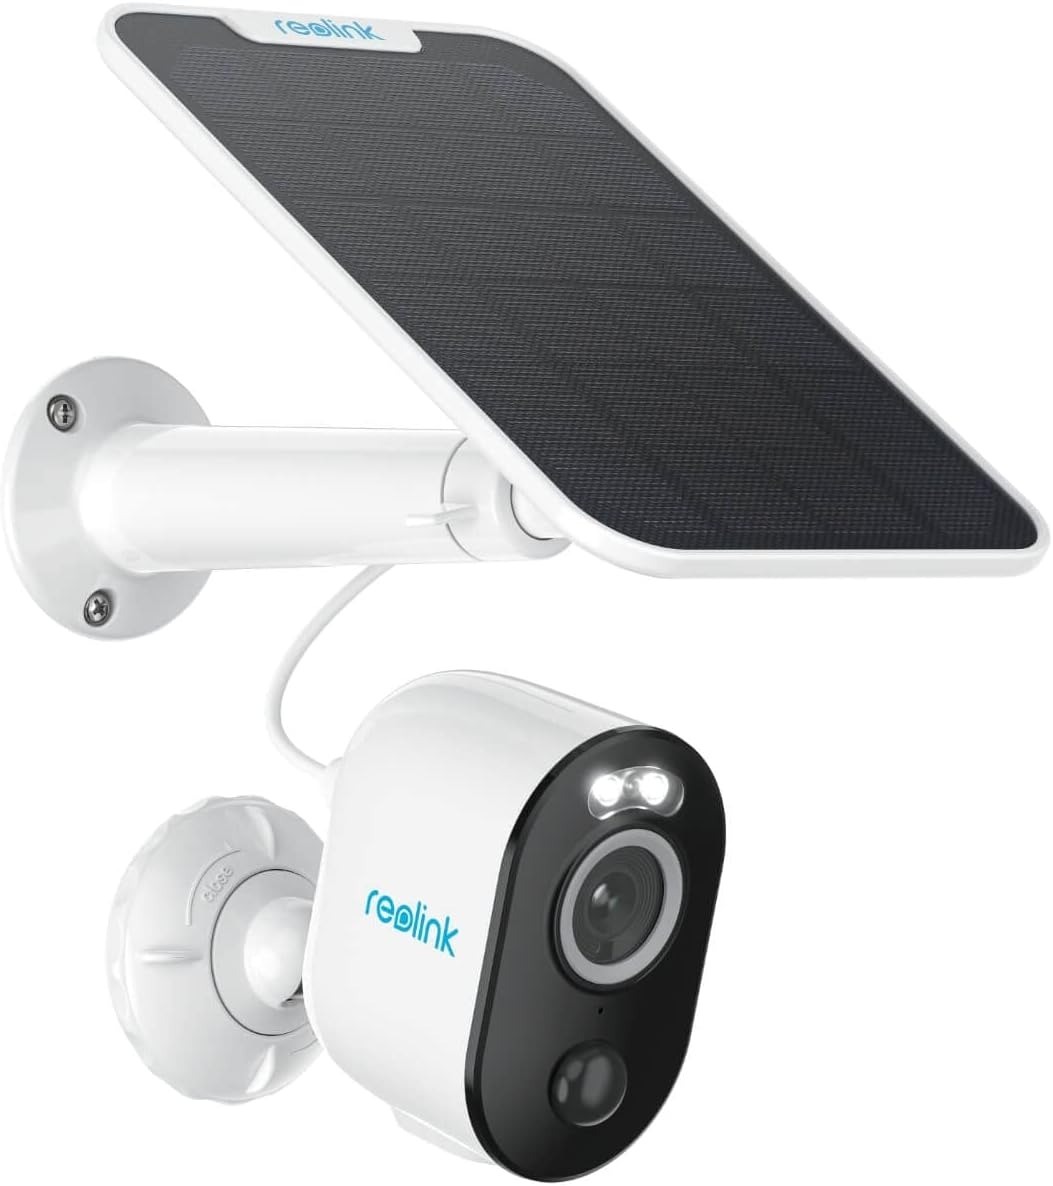 Reolink Argus 3 Pro 4MP Wireless Outdoor Security Camera + Solar Panel $90 + Free Shipping